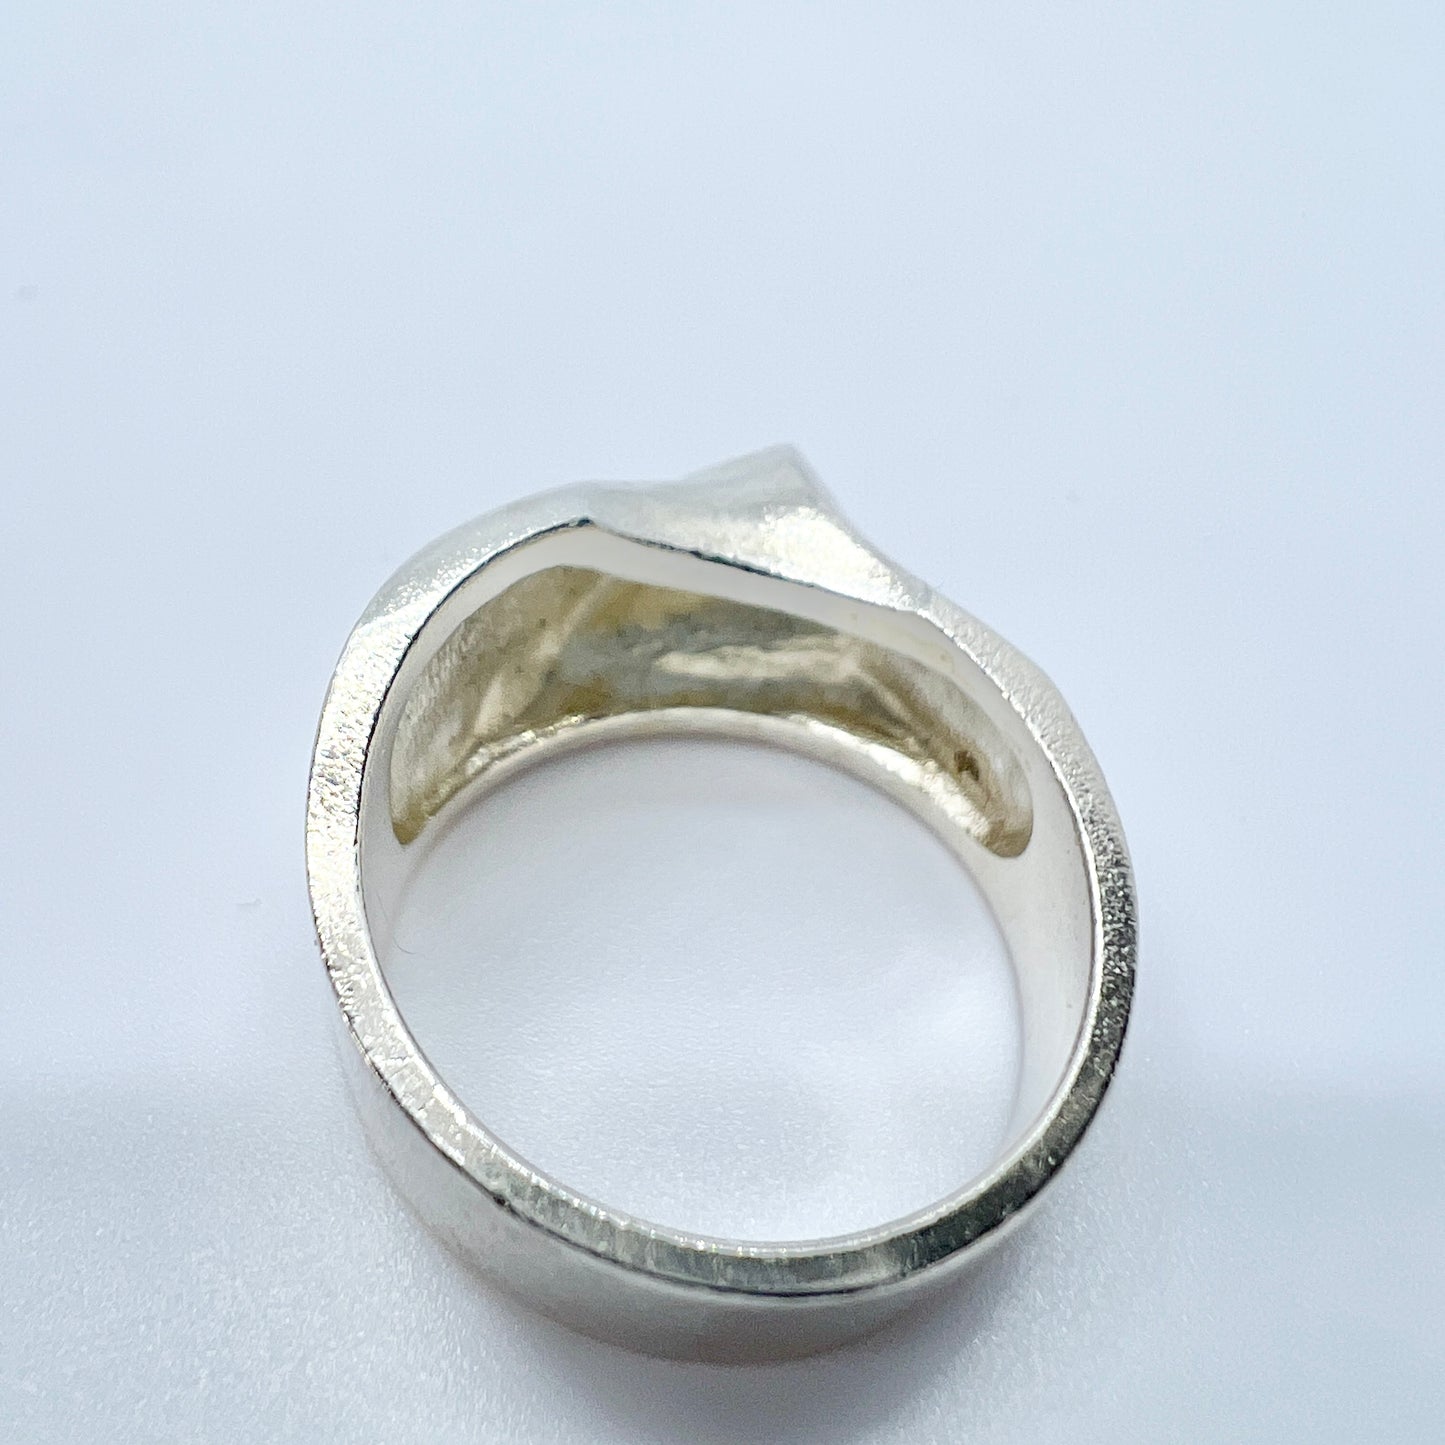 Bjorn Weckstrom for Lapponia, Finland 1978. Vintage Sterling Silver Ring.